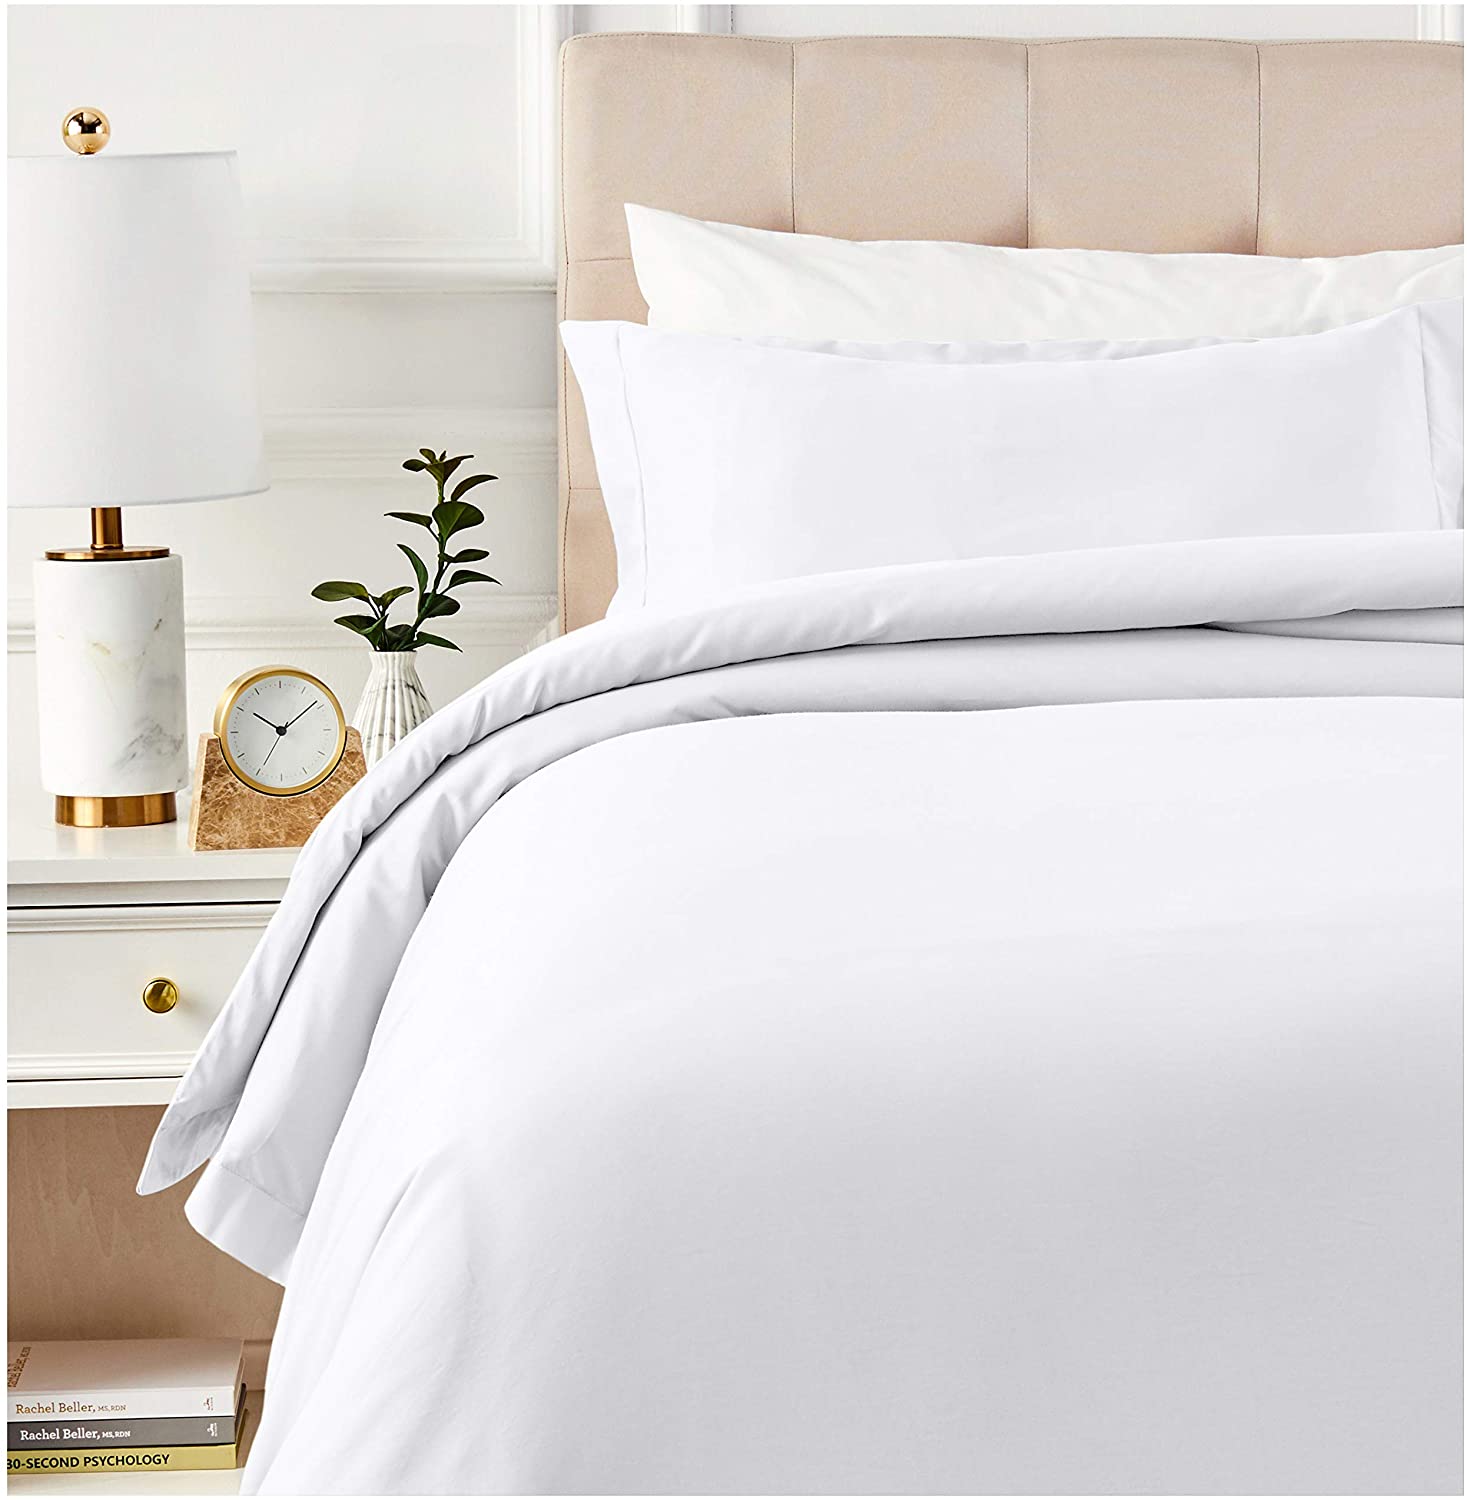 Price:$48.49  Basics 400 Thread Count Cotton Duvet Cover Set with Sateen Finish - Twin, Off-White : Home & Kitchen